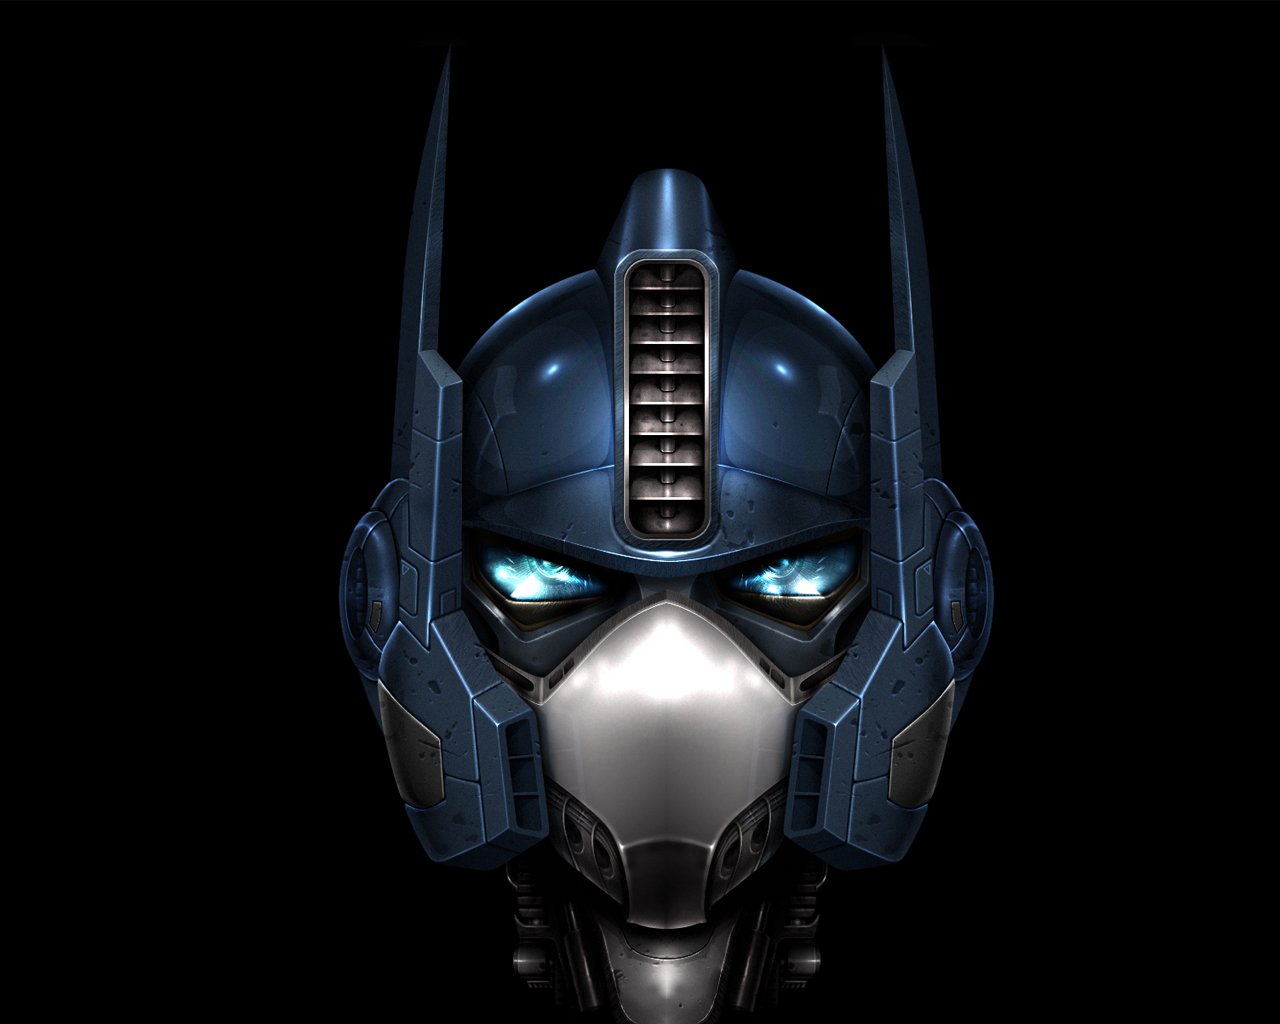 Top 20 MoviesShows Wallpapers optimus prime wallpaper transformers